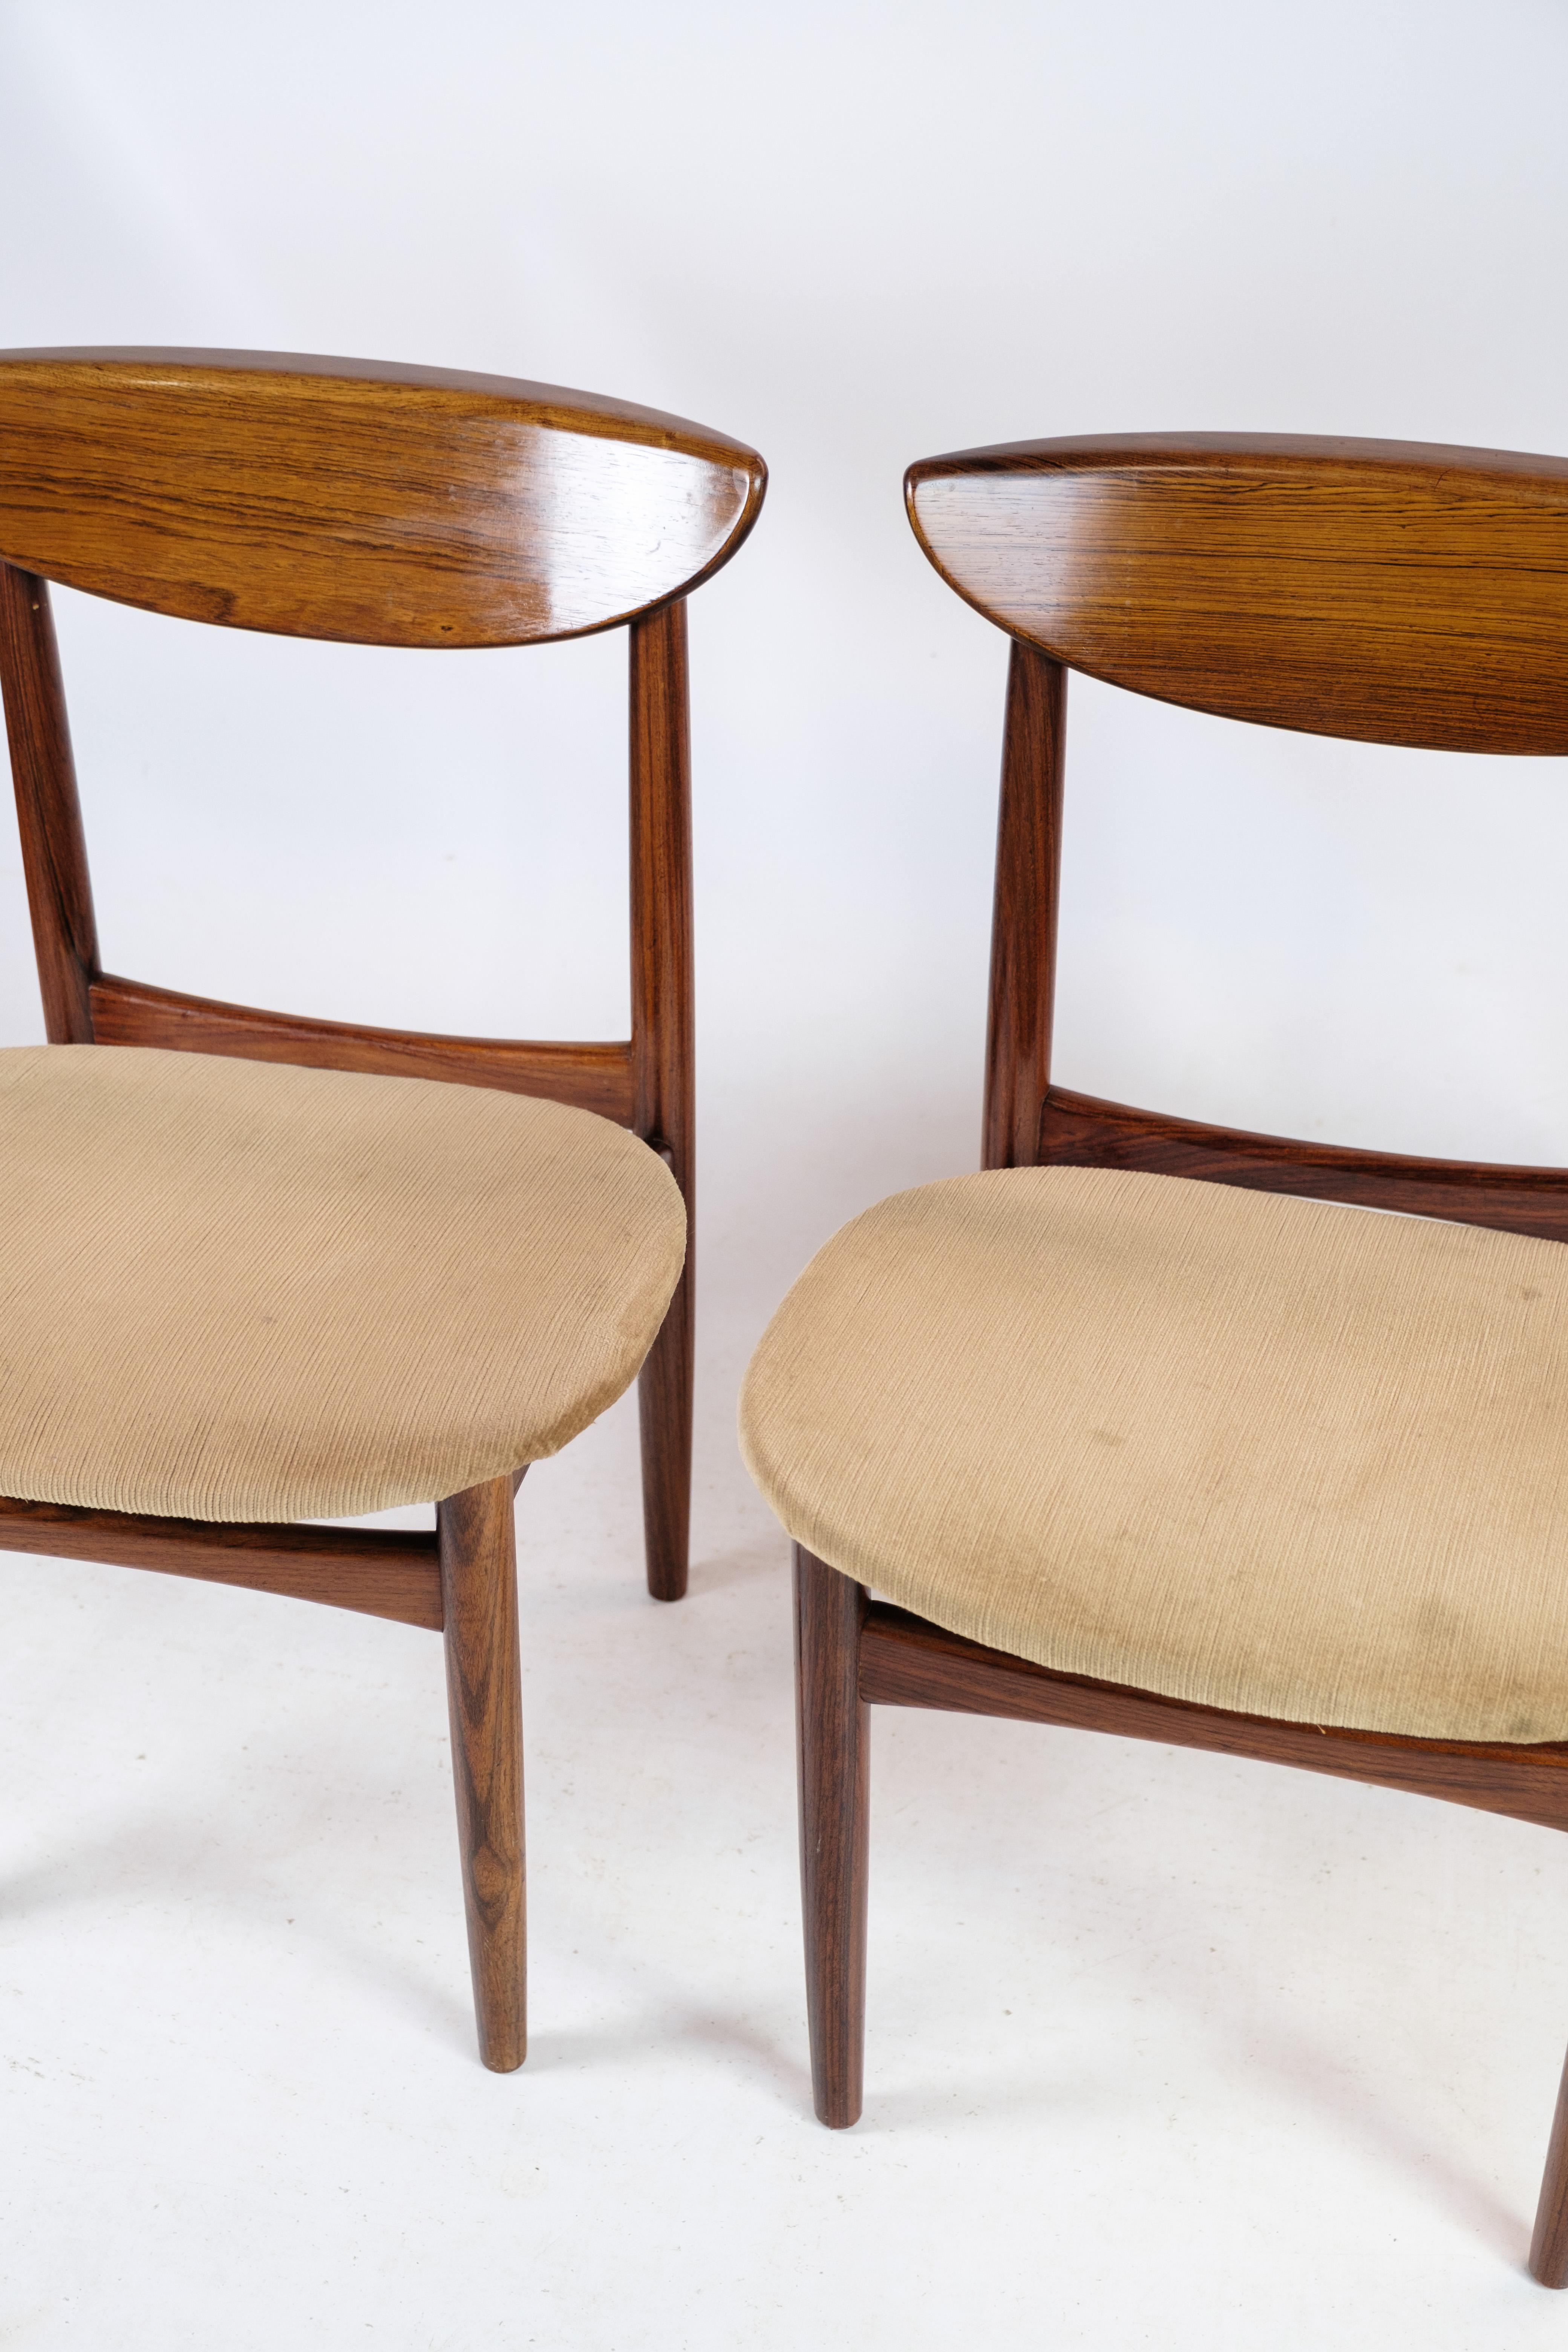 Danish Set of 2 Chairs Made In Rosewood By Peter Hvidt From 1960s For Sale